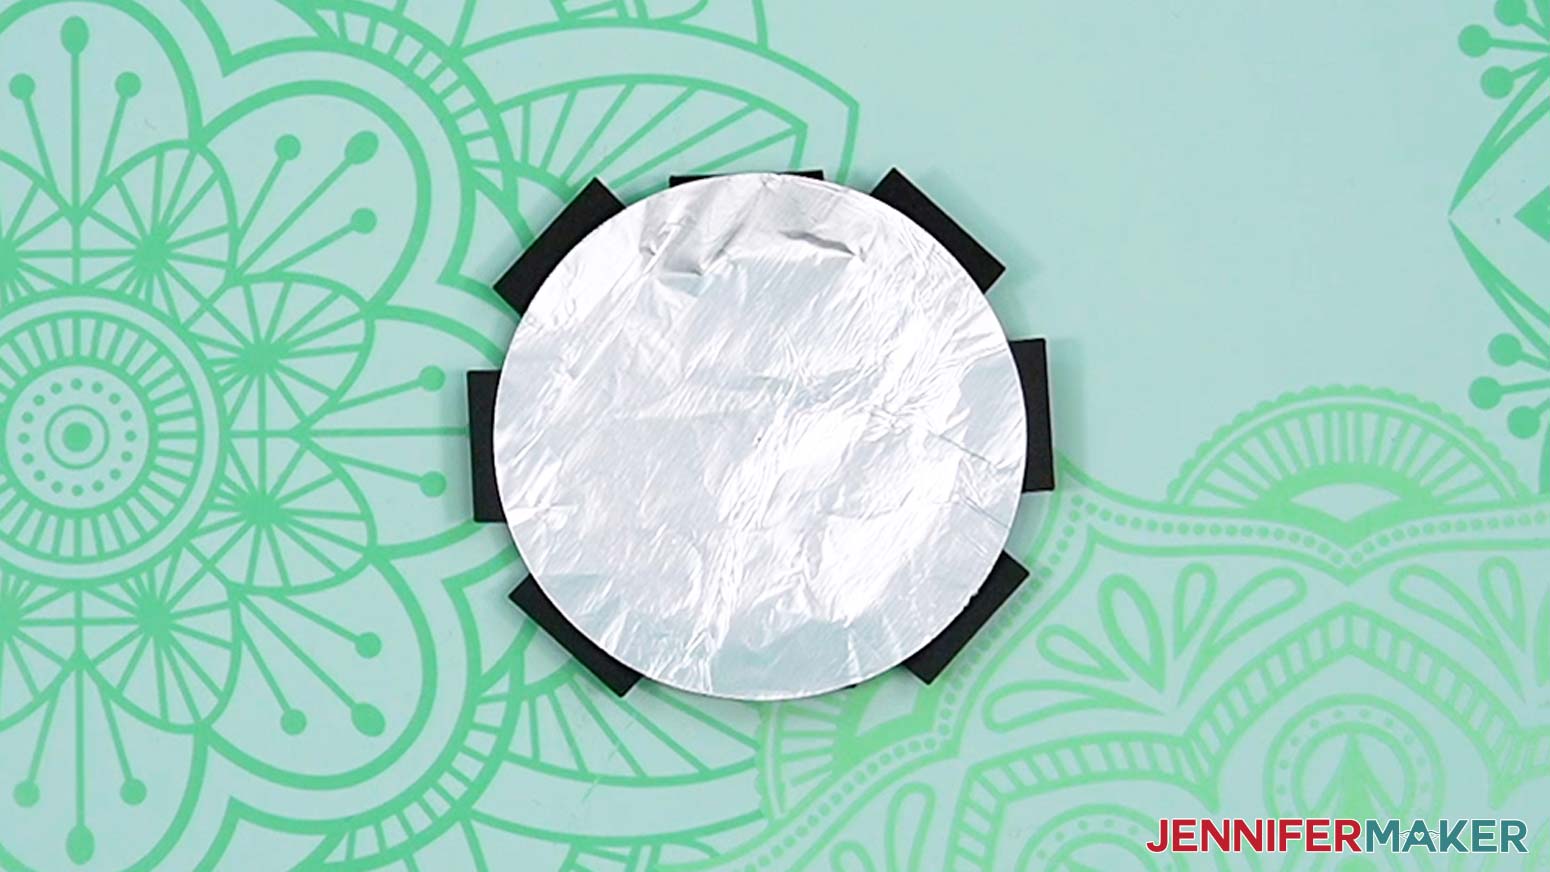 Align the foil circle over the center of the sunburst piece.